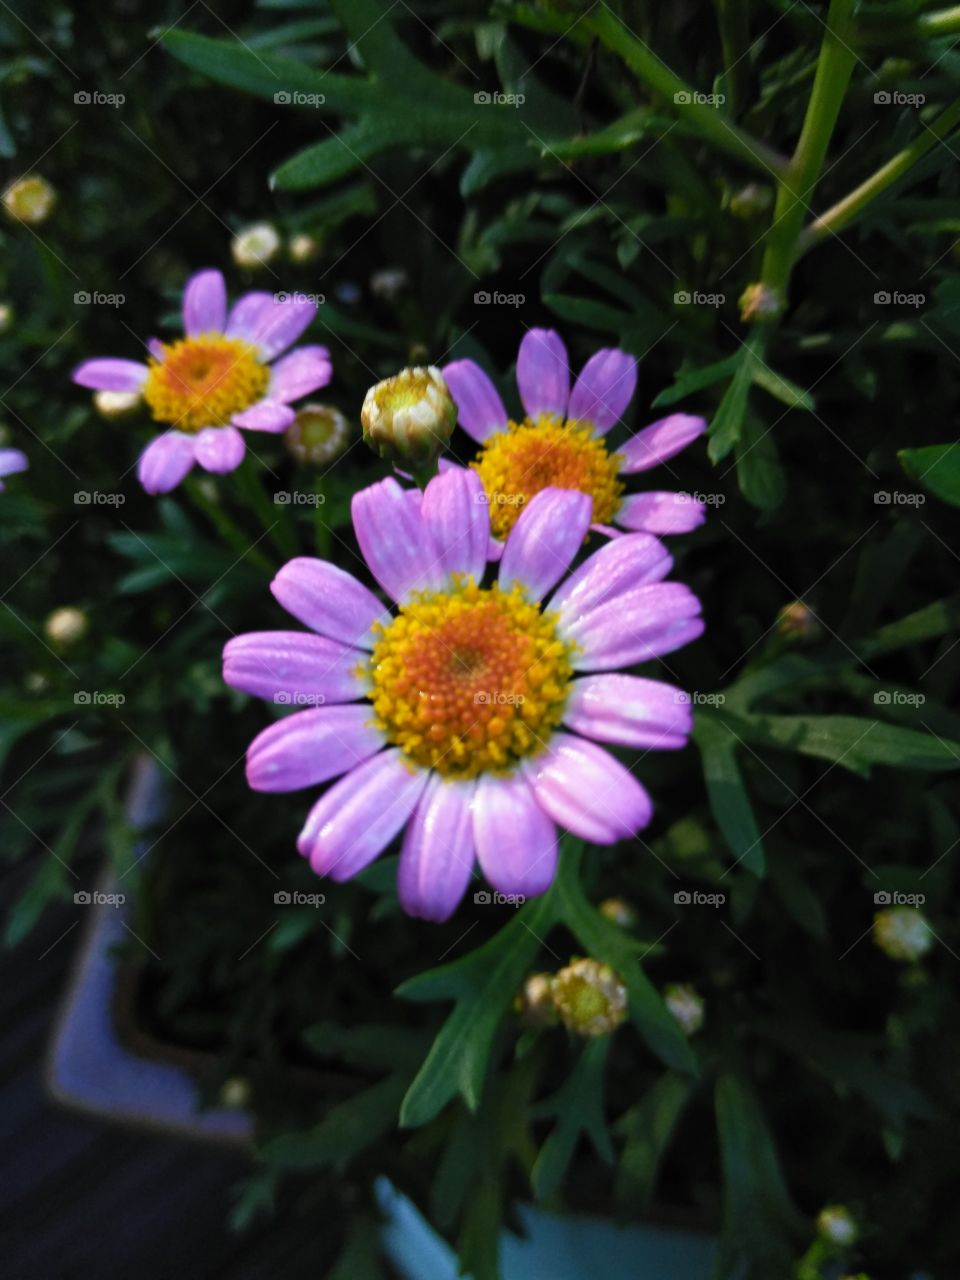 Asters bursting open in the Dewey tropical light